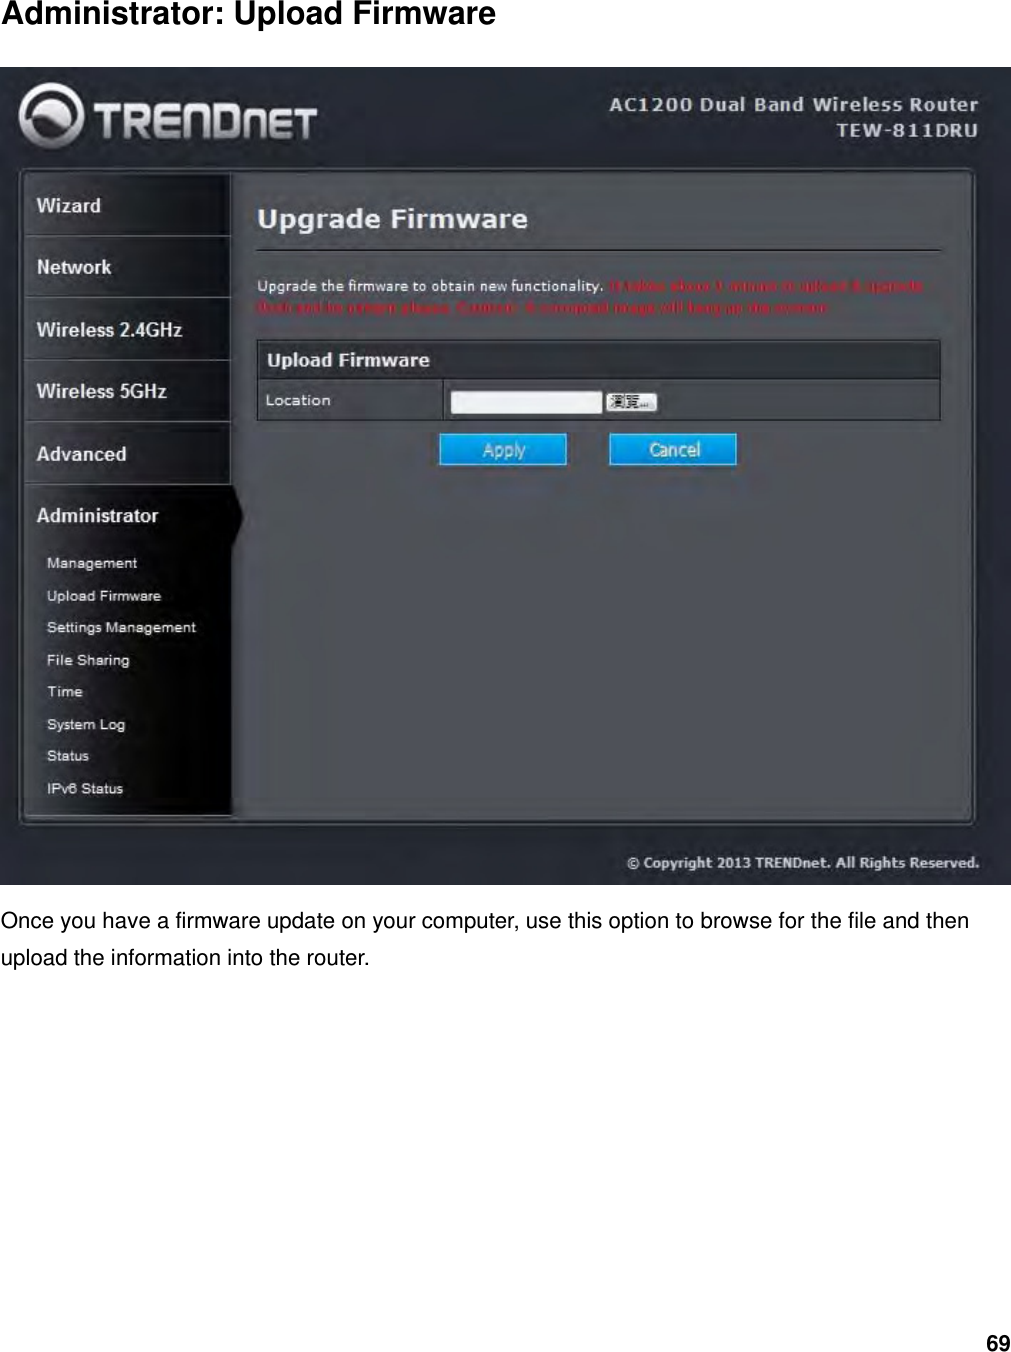 69 Administrator: Upload Firmware  Once you have a firmware update on your computer, use this option to browse for the file and then upload the information into the router.     